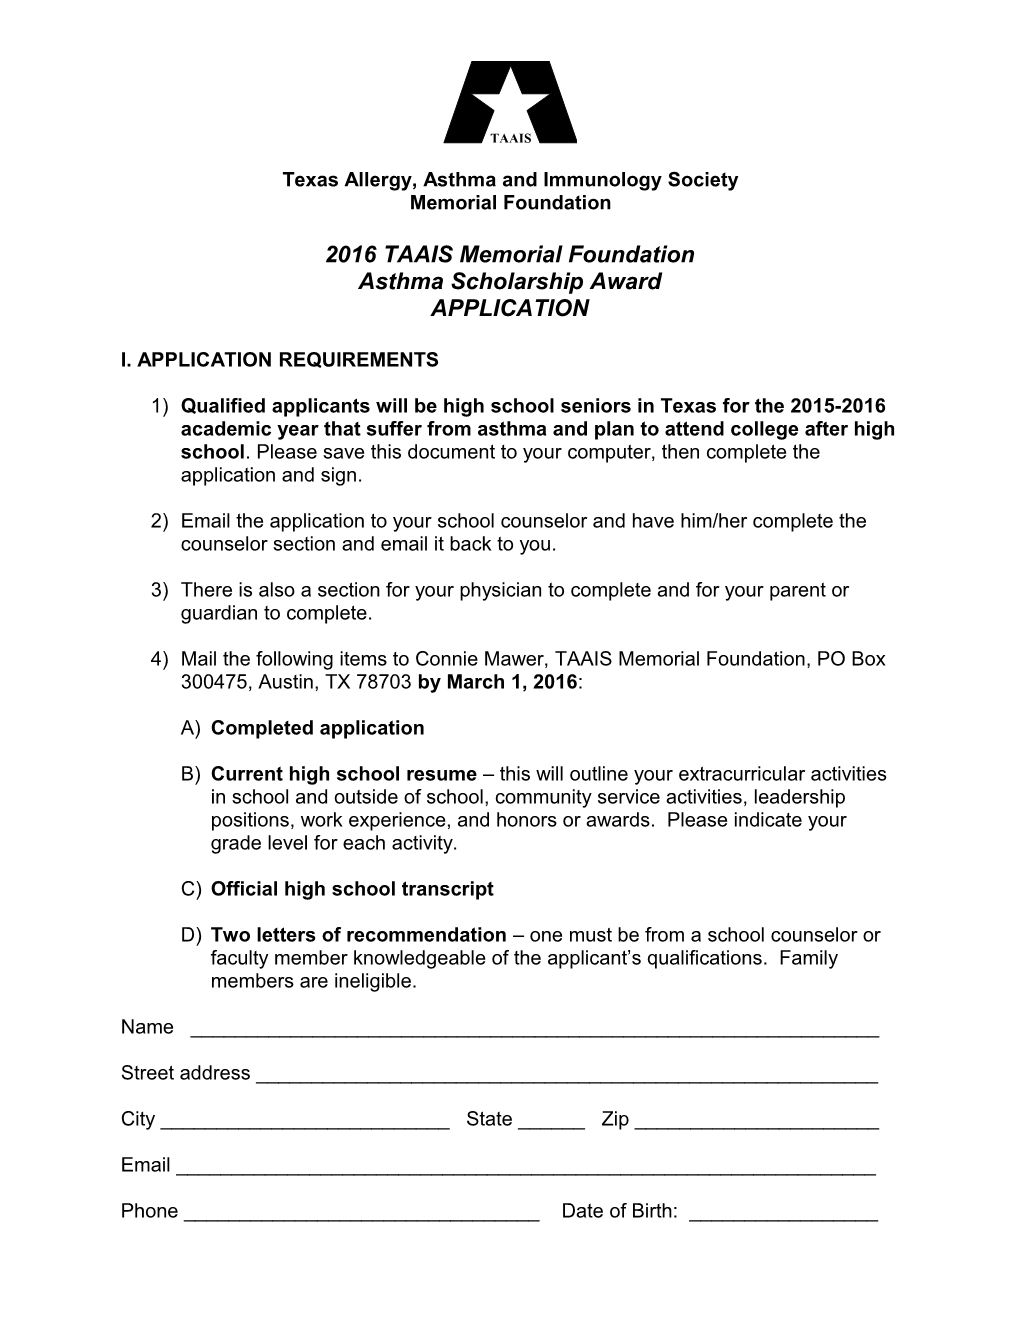 Scholarship Application - SAMPLE ONLY